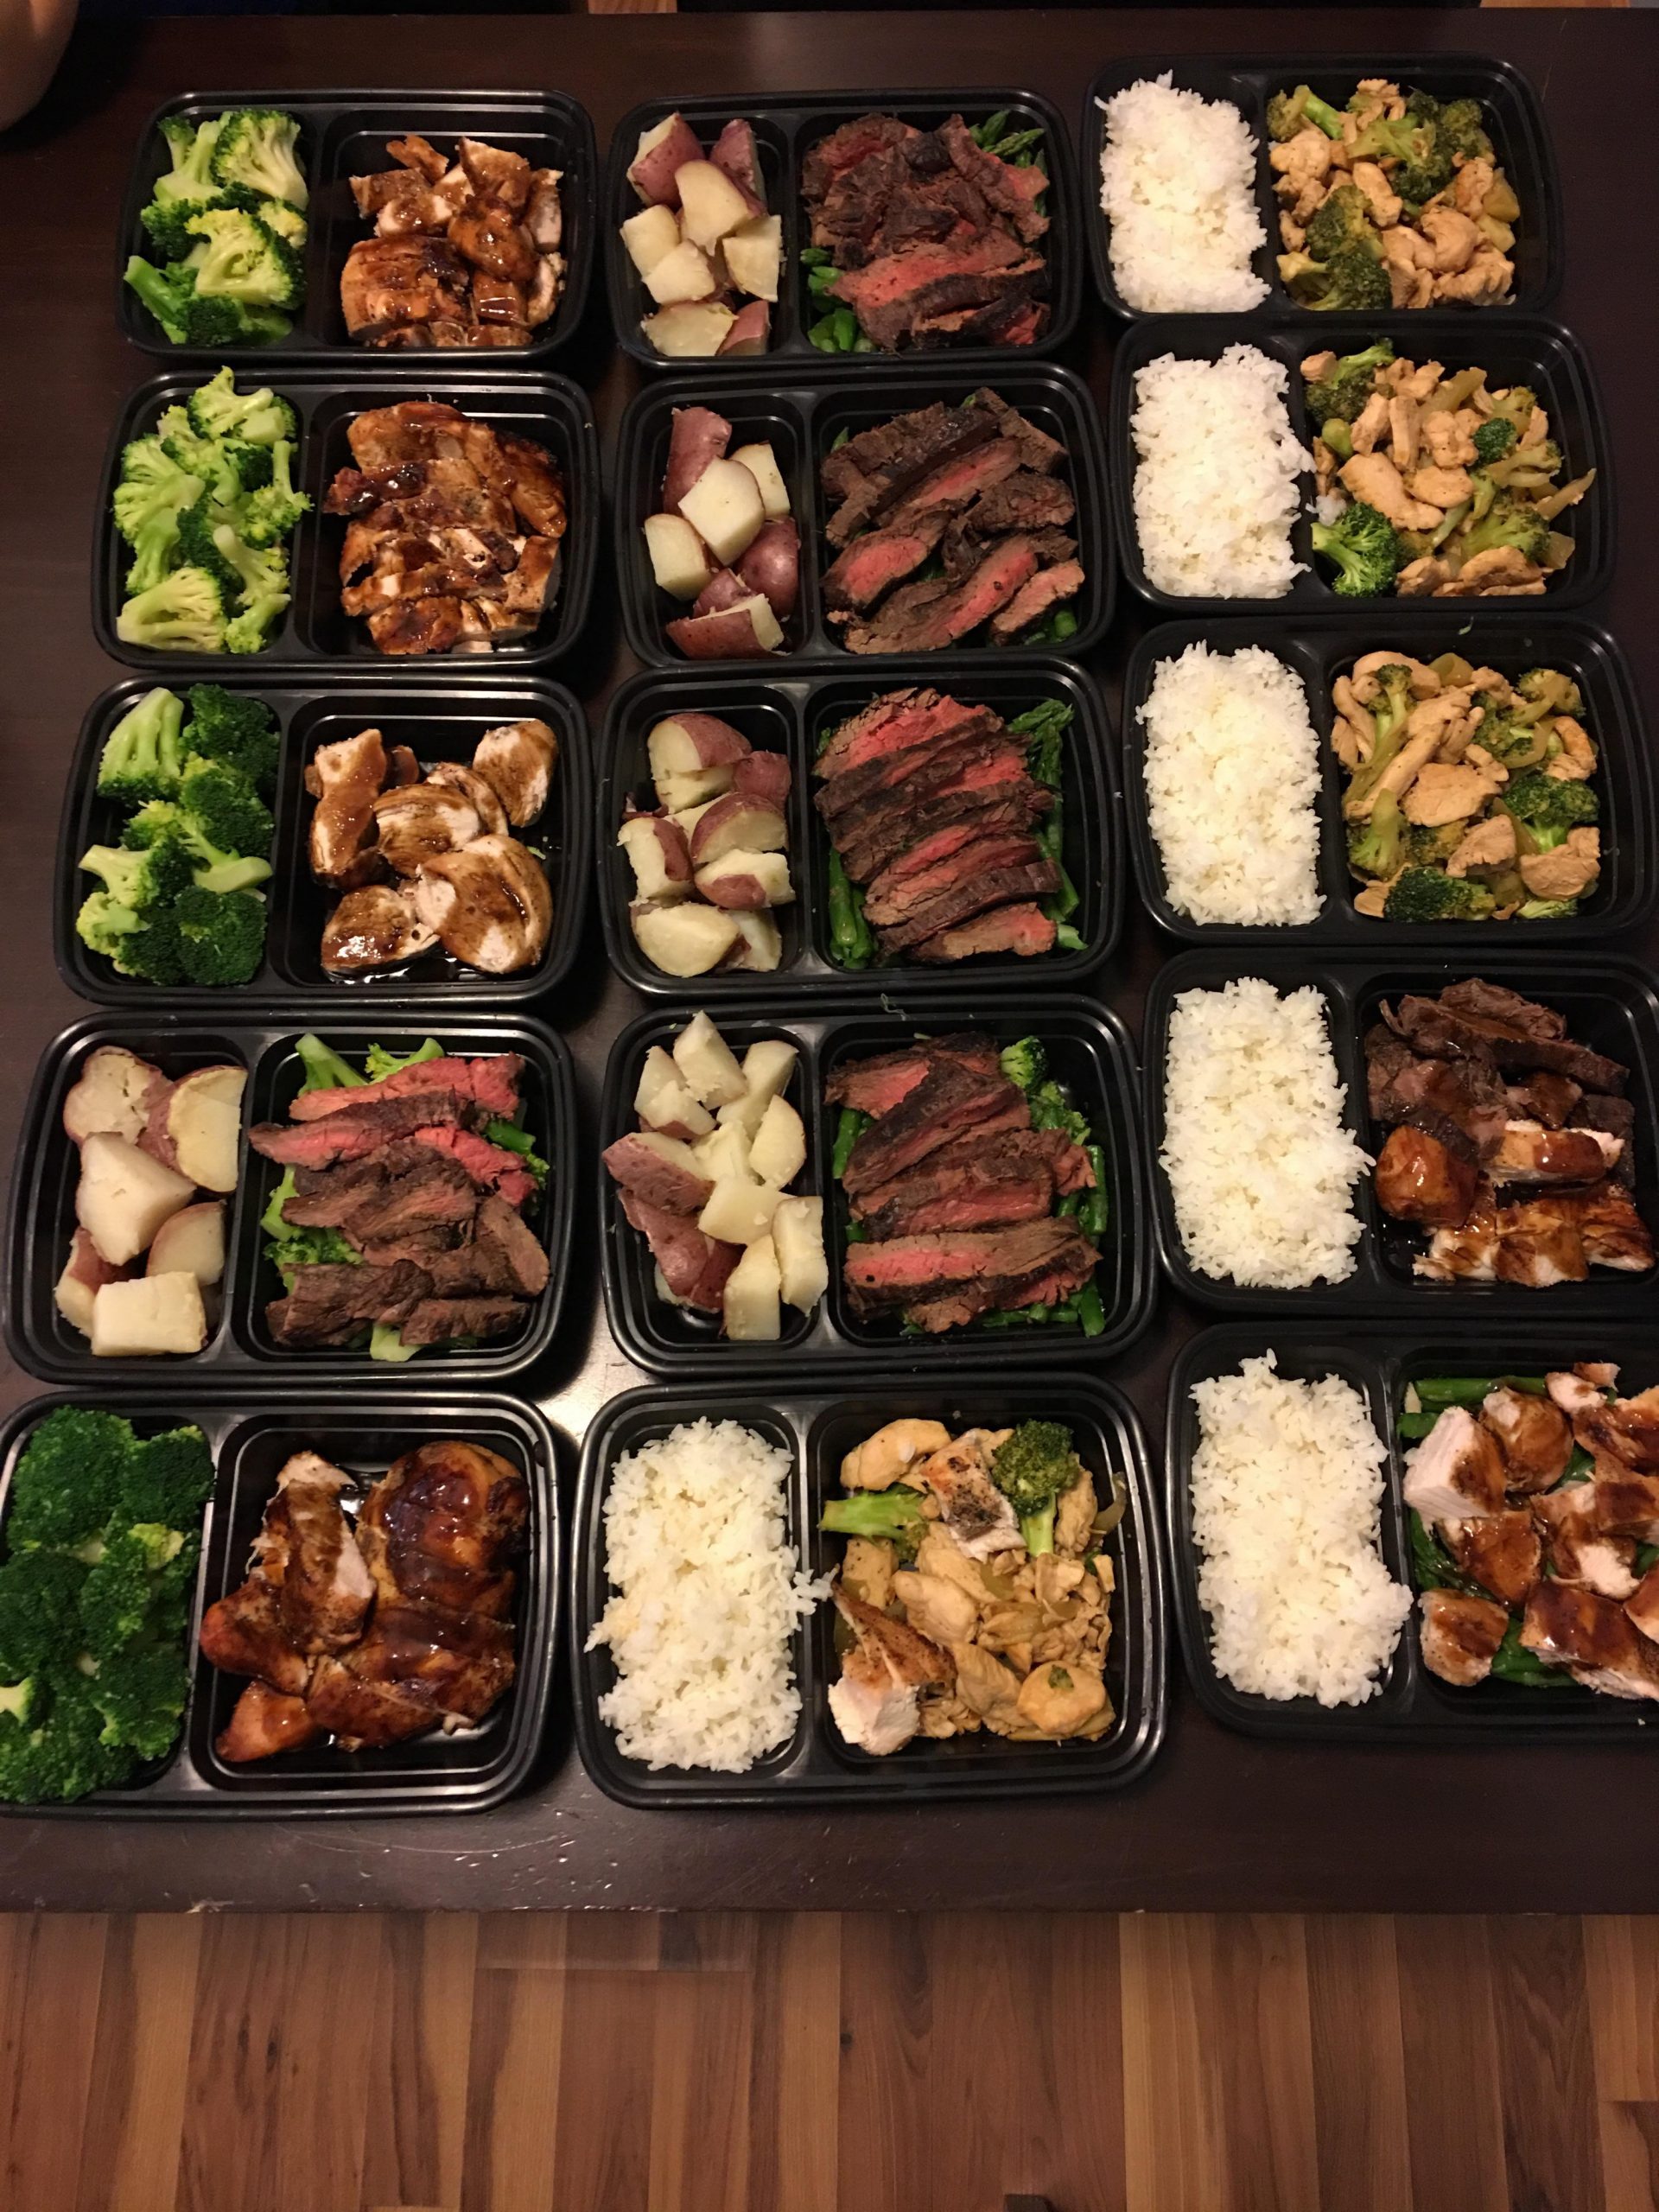 Grilled chicken/flank steak, chicken and broccoli combo ...